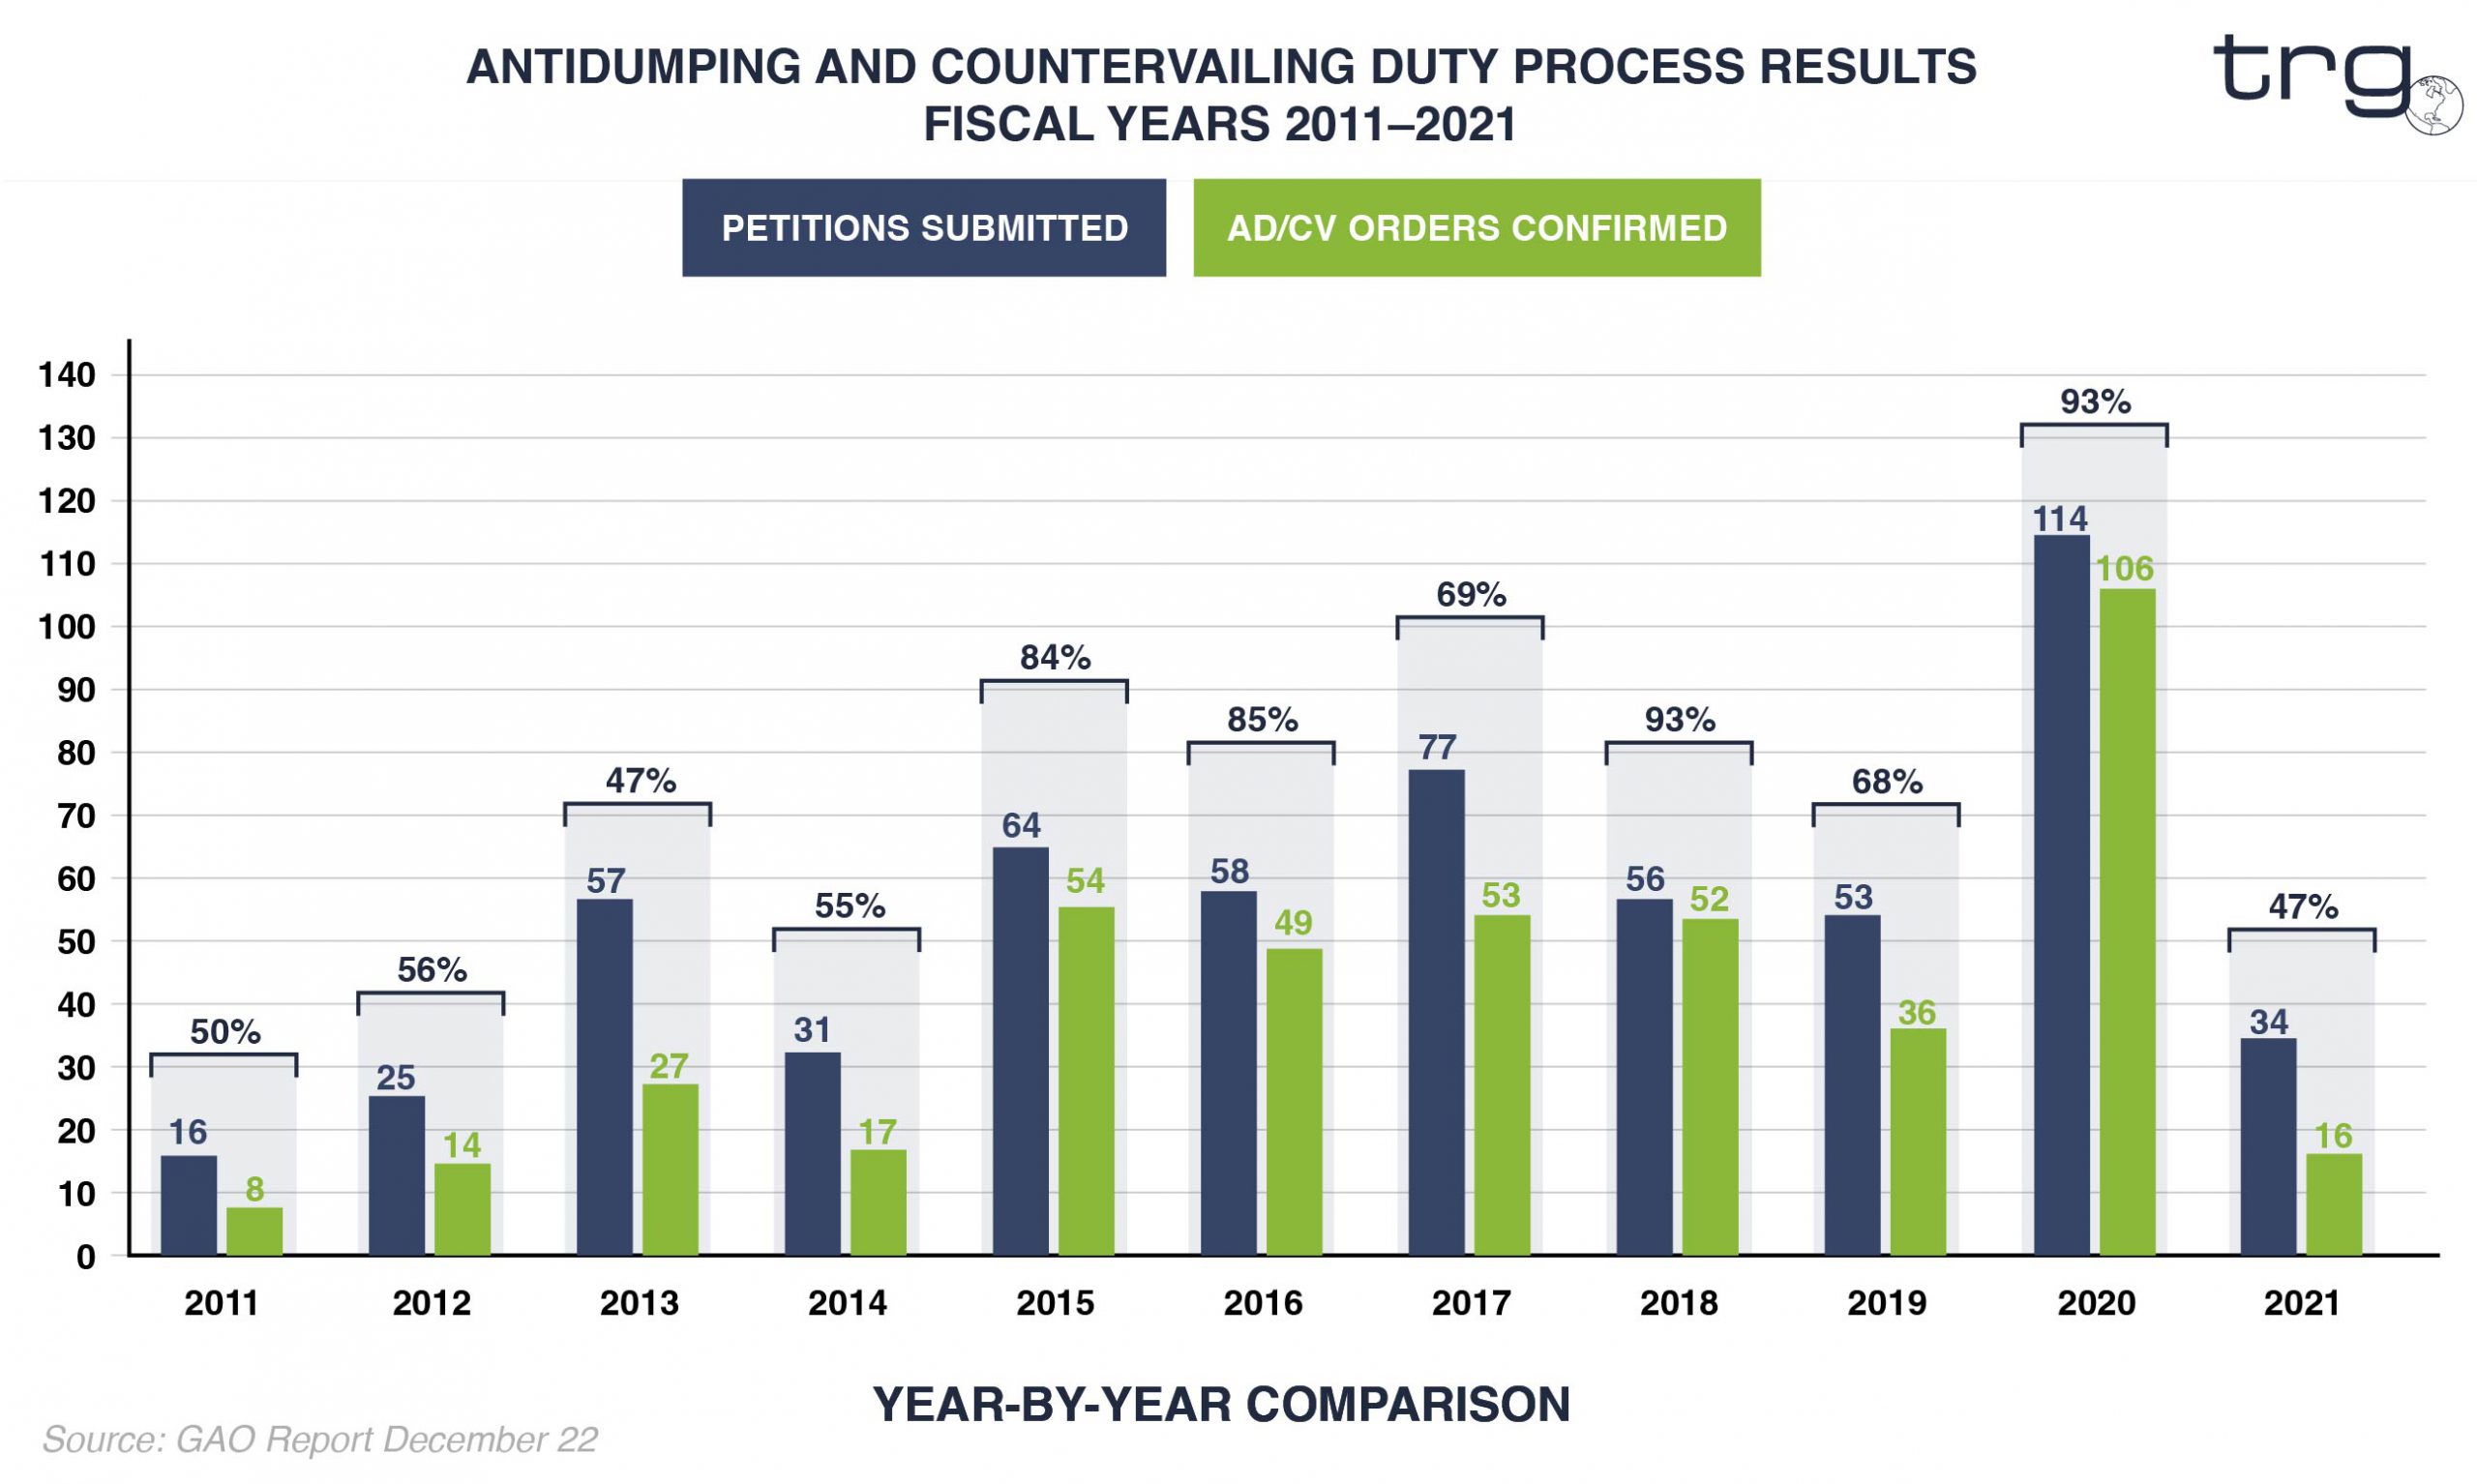 TRG presents how many Antidumping and Countervailing Petitions became confirmed cases from 2011 through 2021.